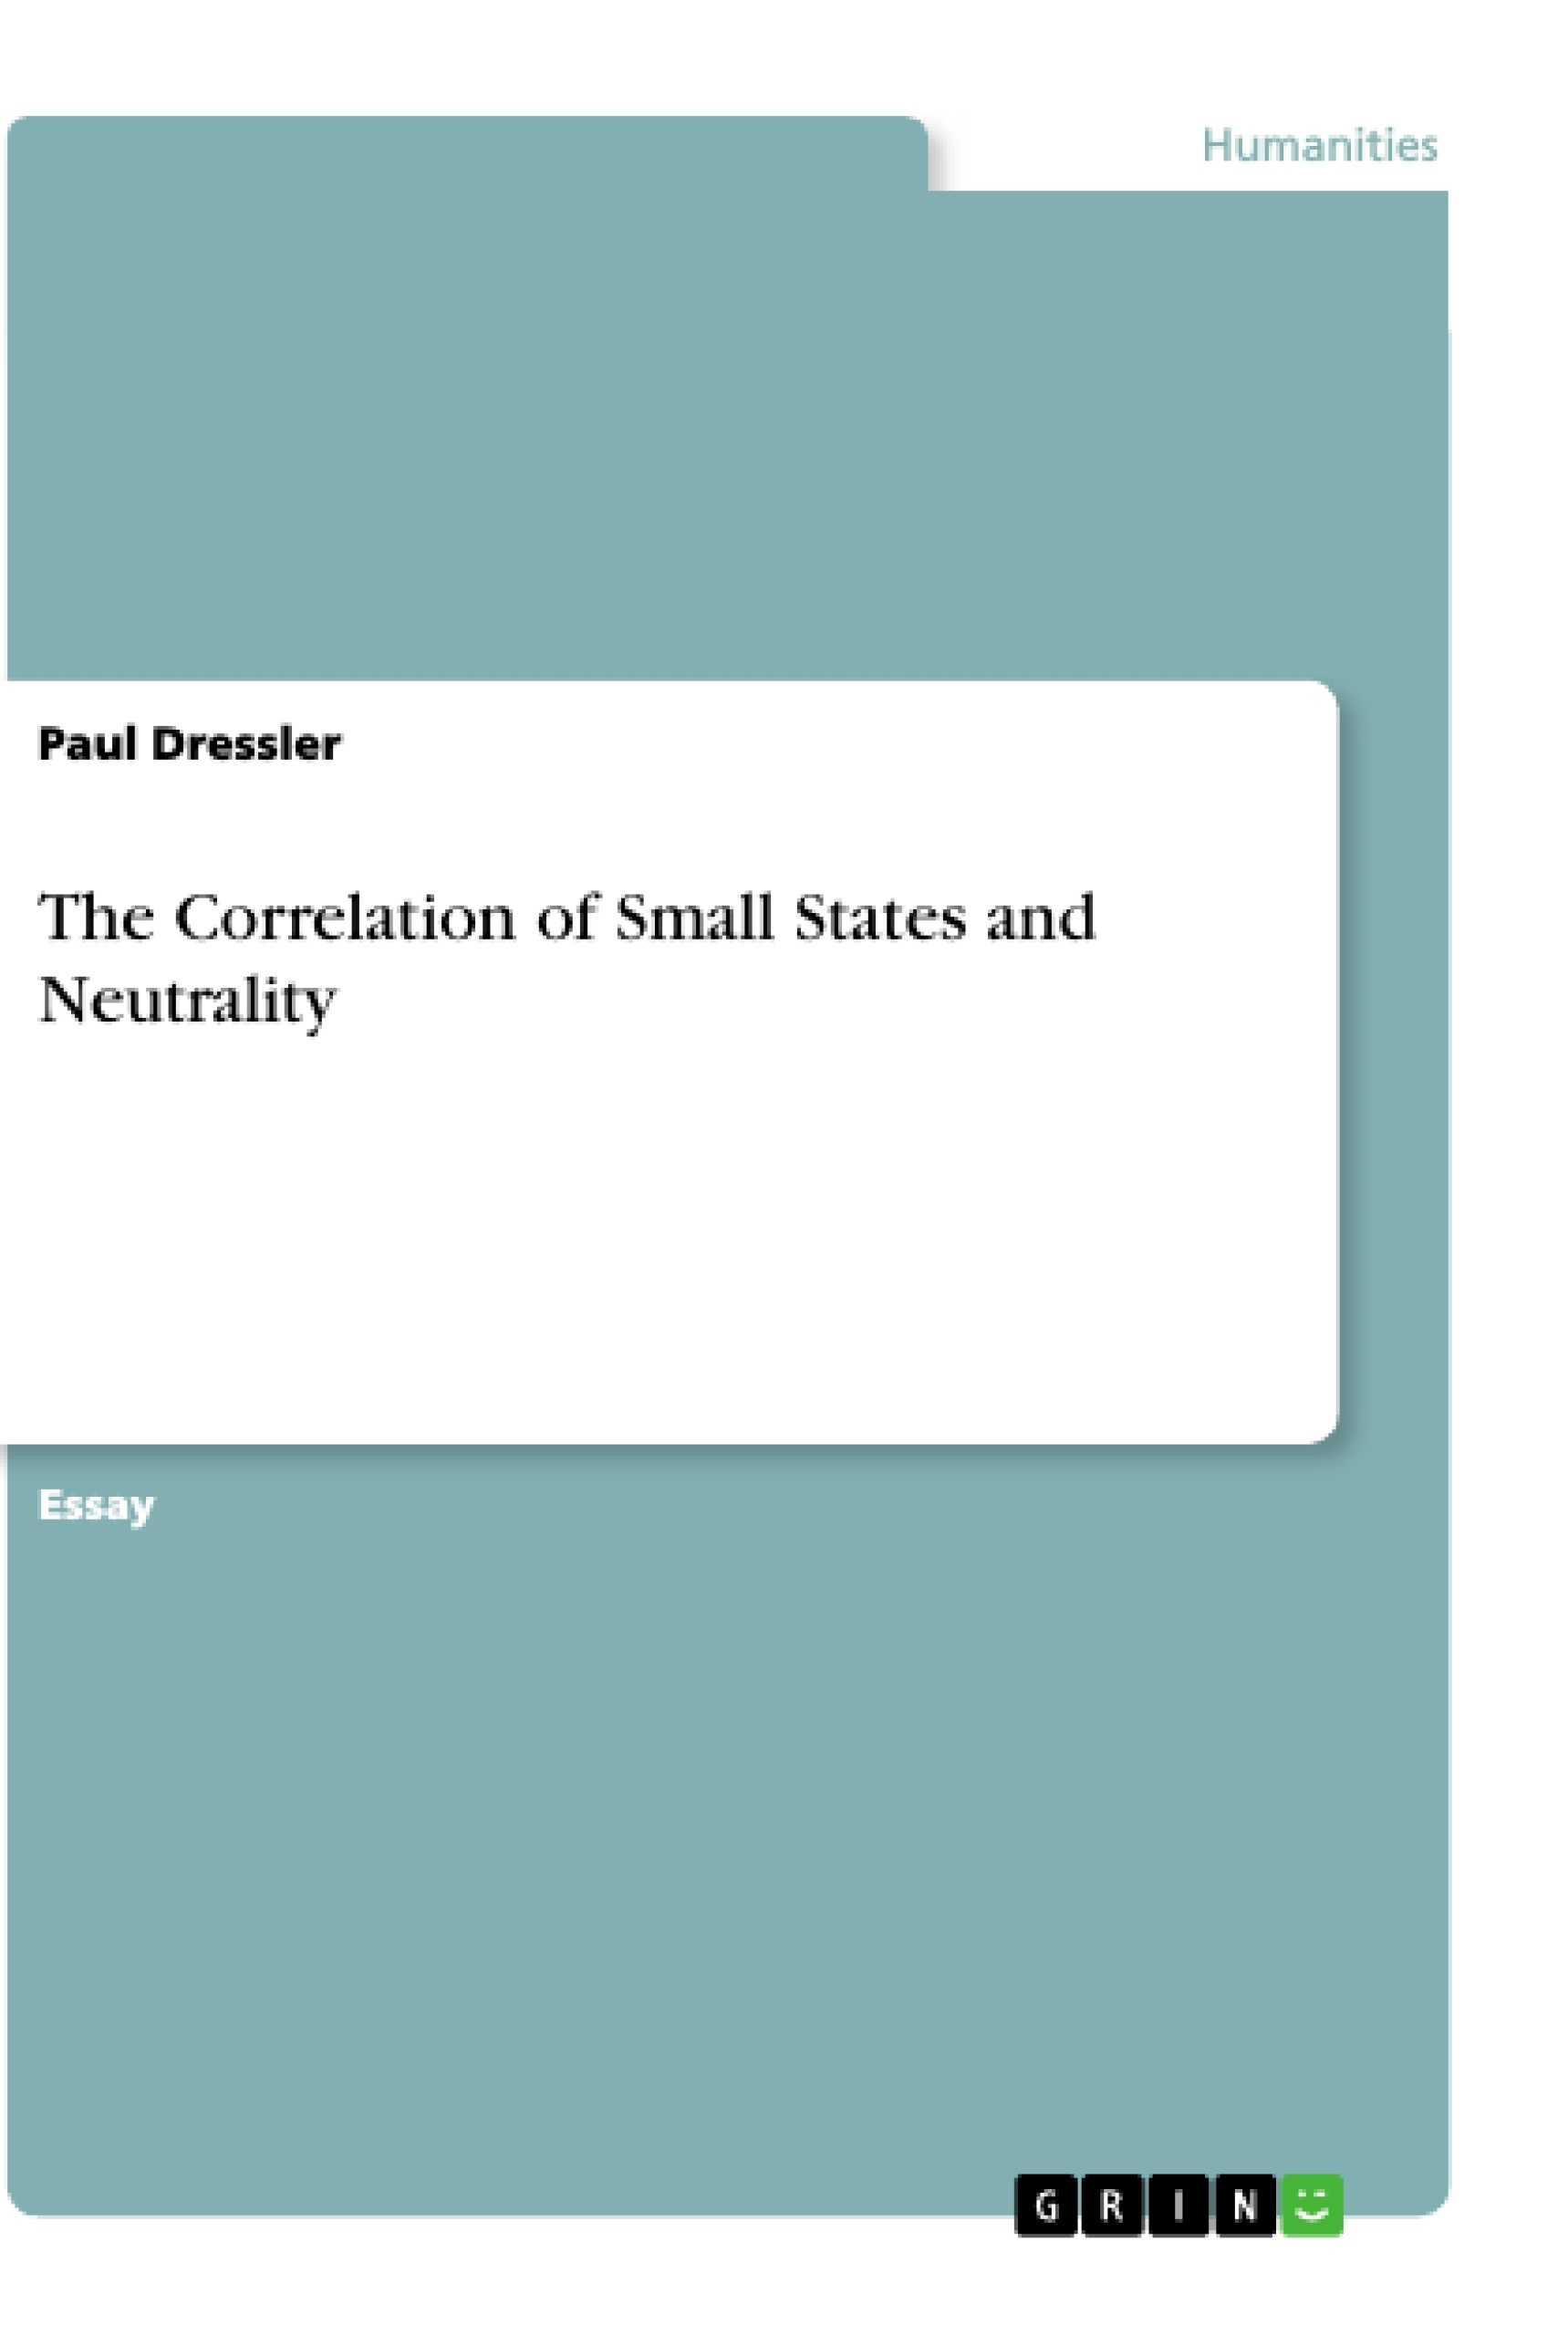 Title: The Correlation of Small States and Neutrality